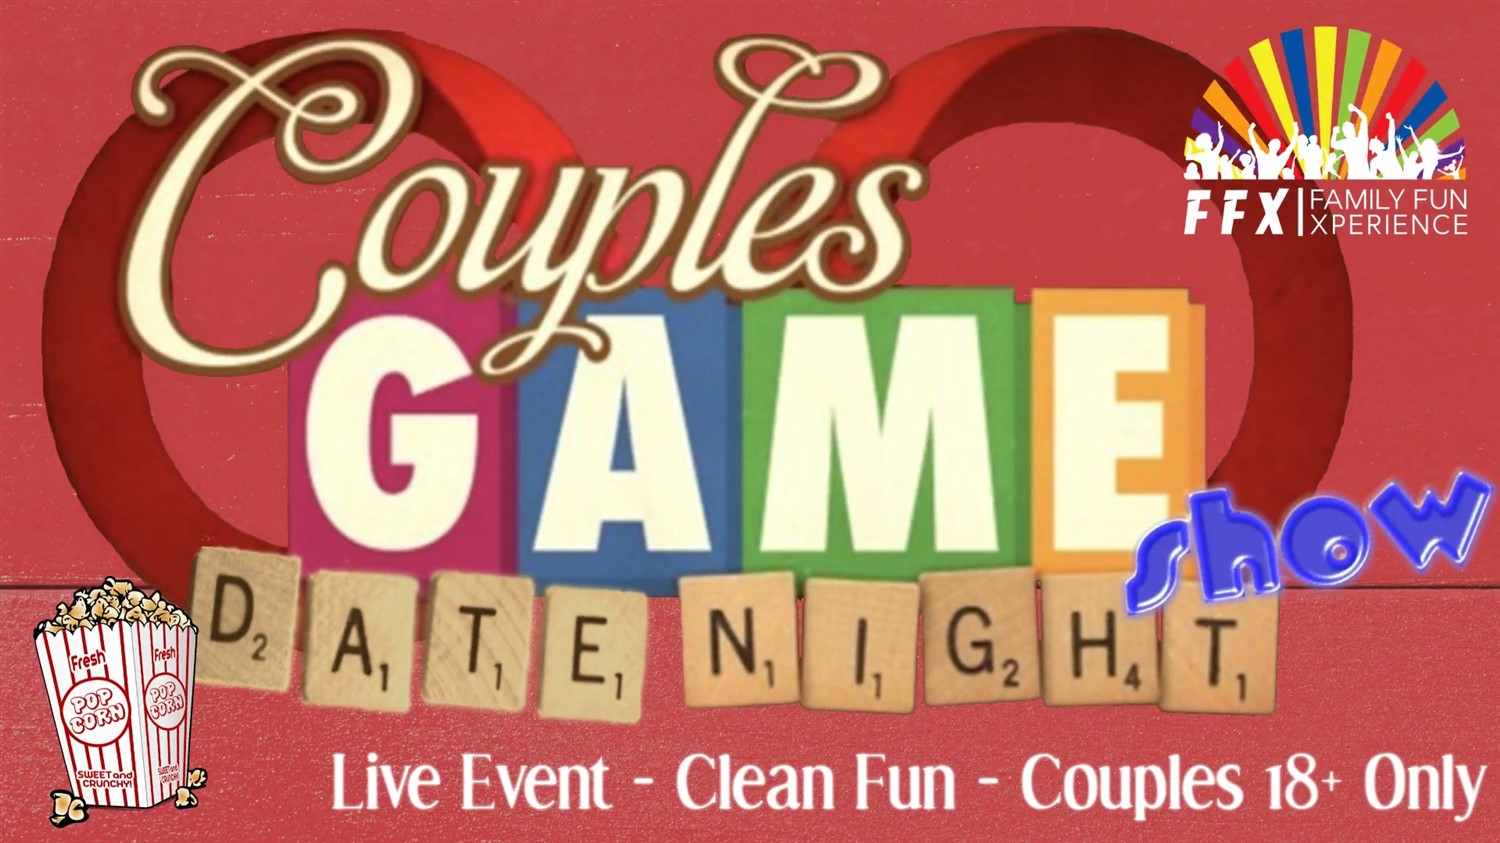 Couples Date Night Game Show! LIVE - Couples Only - FUN! on Apr 26, 19:00@FFX Theatre - Pick a seat, Buy tickets and Get information on Family Fun Xperience tickets.ffxshow.org